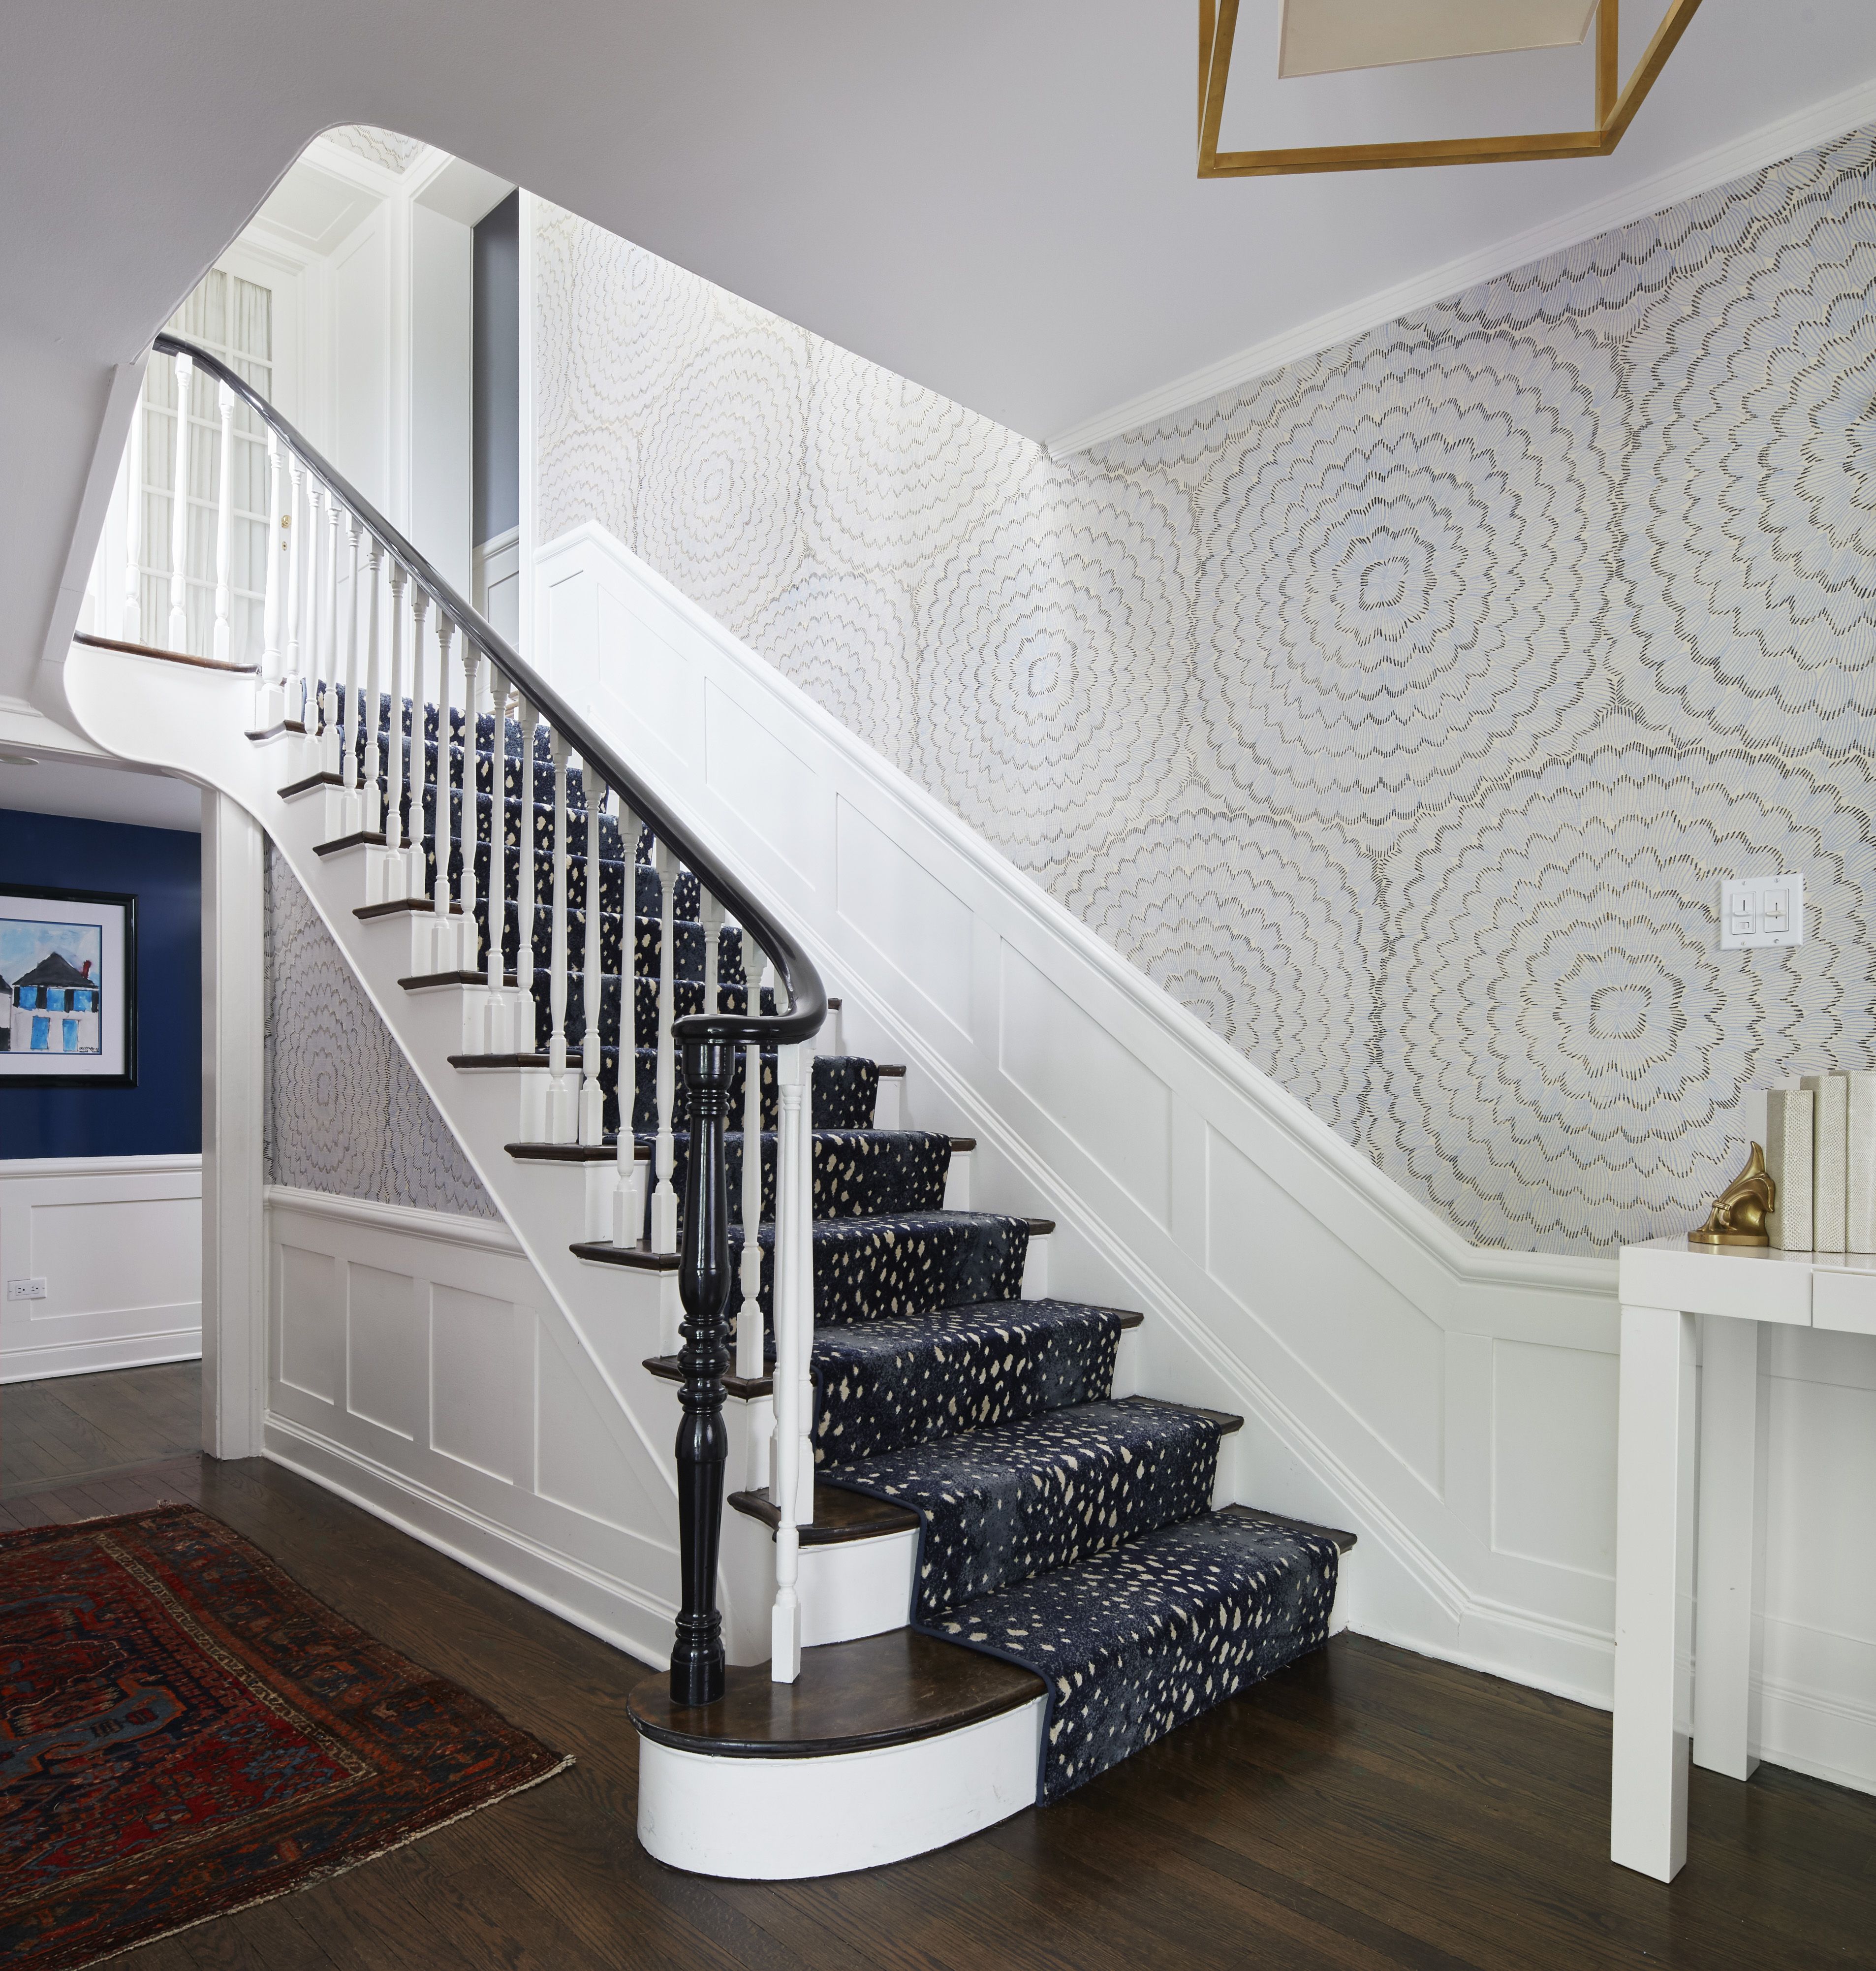 Korean Paper Havelock Stairs 3D Wallpaper Thickness 05 Mm To 1 Mm